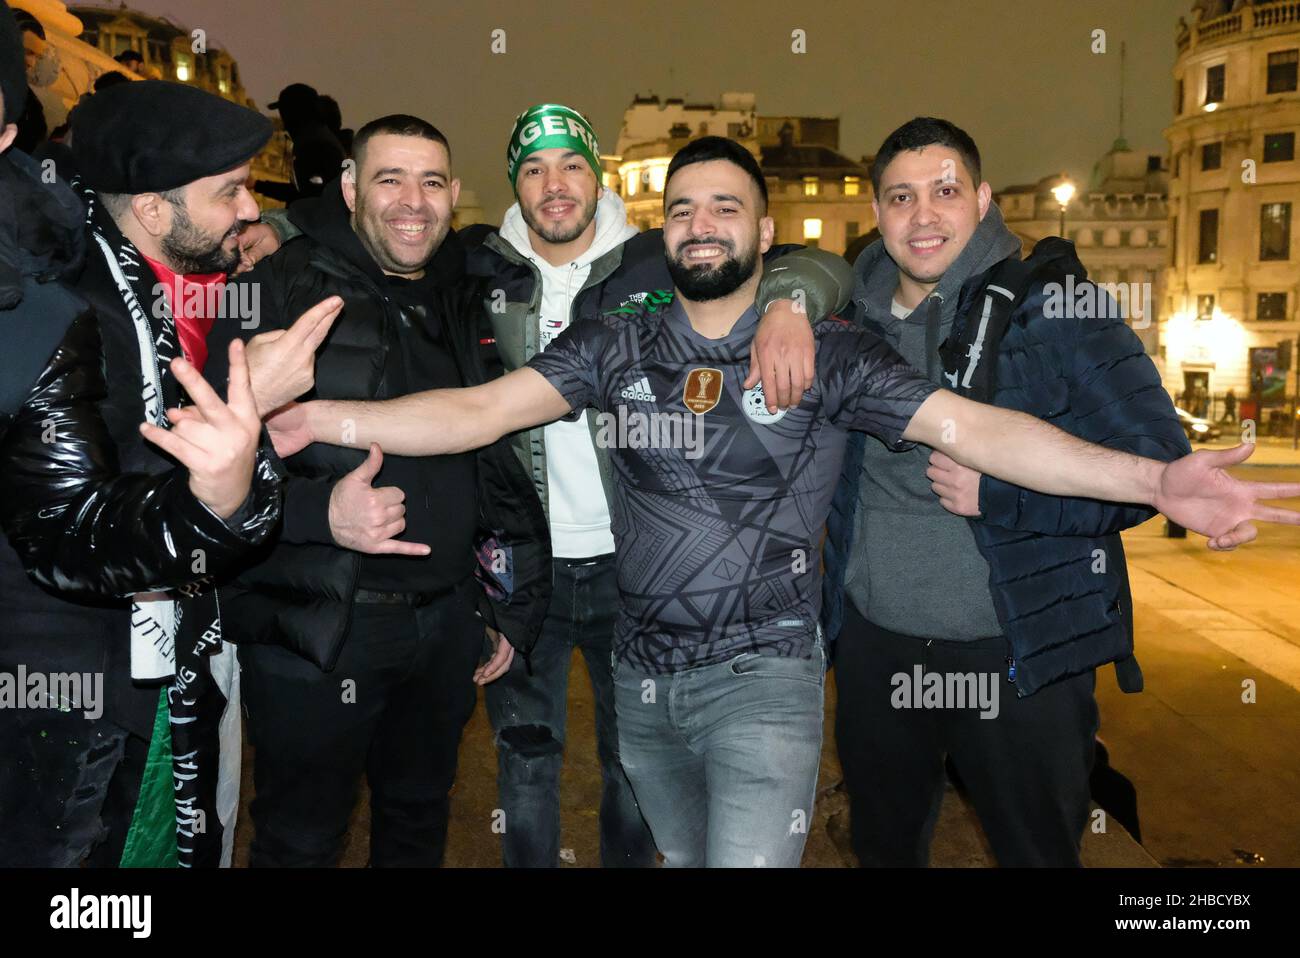 London, UK, 18th Dec, 2021. Hundreds of Algeria football fans gather in Trafalgar Square after a 2-0 victory against Tunisia in the 2021 FIFA Arab Cup, scoring the goals in extra-time.  Revellers set off dozens upon dozens of fireworks and flares in the square and at the foot of Nelson's Column - a location traditionally known for celebrating football fans. Credit: Eleventh Hour Photography/Alamy Live News Stock Photo